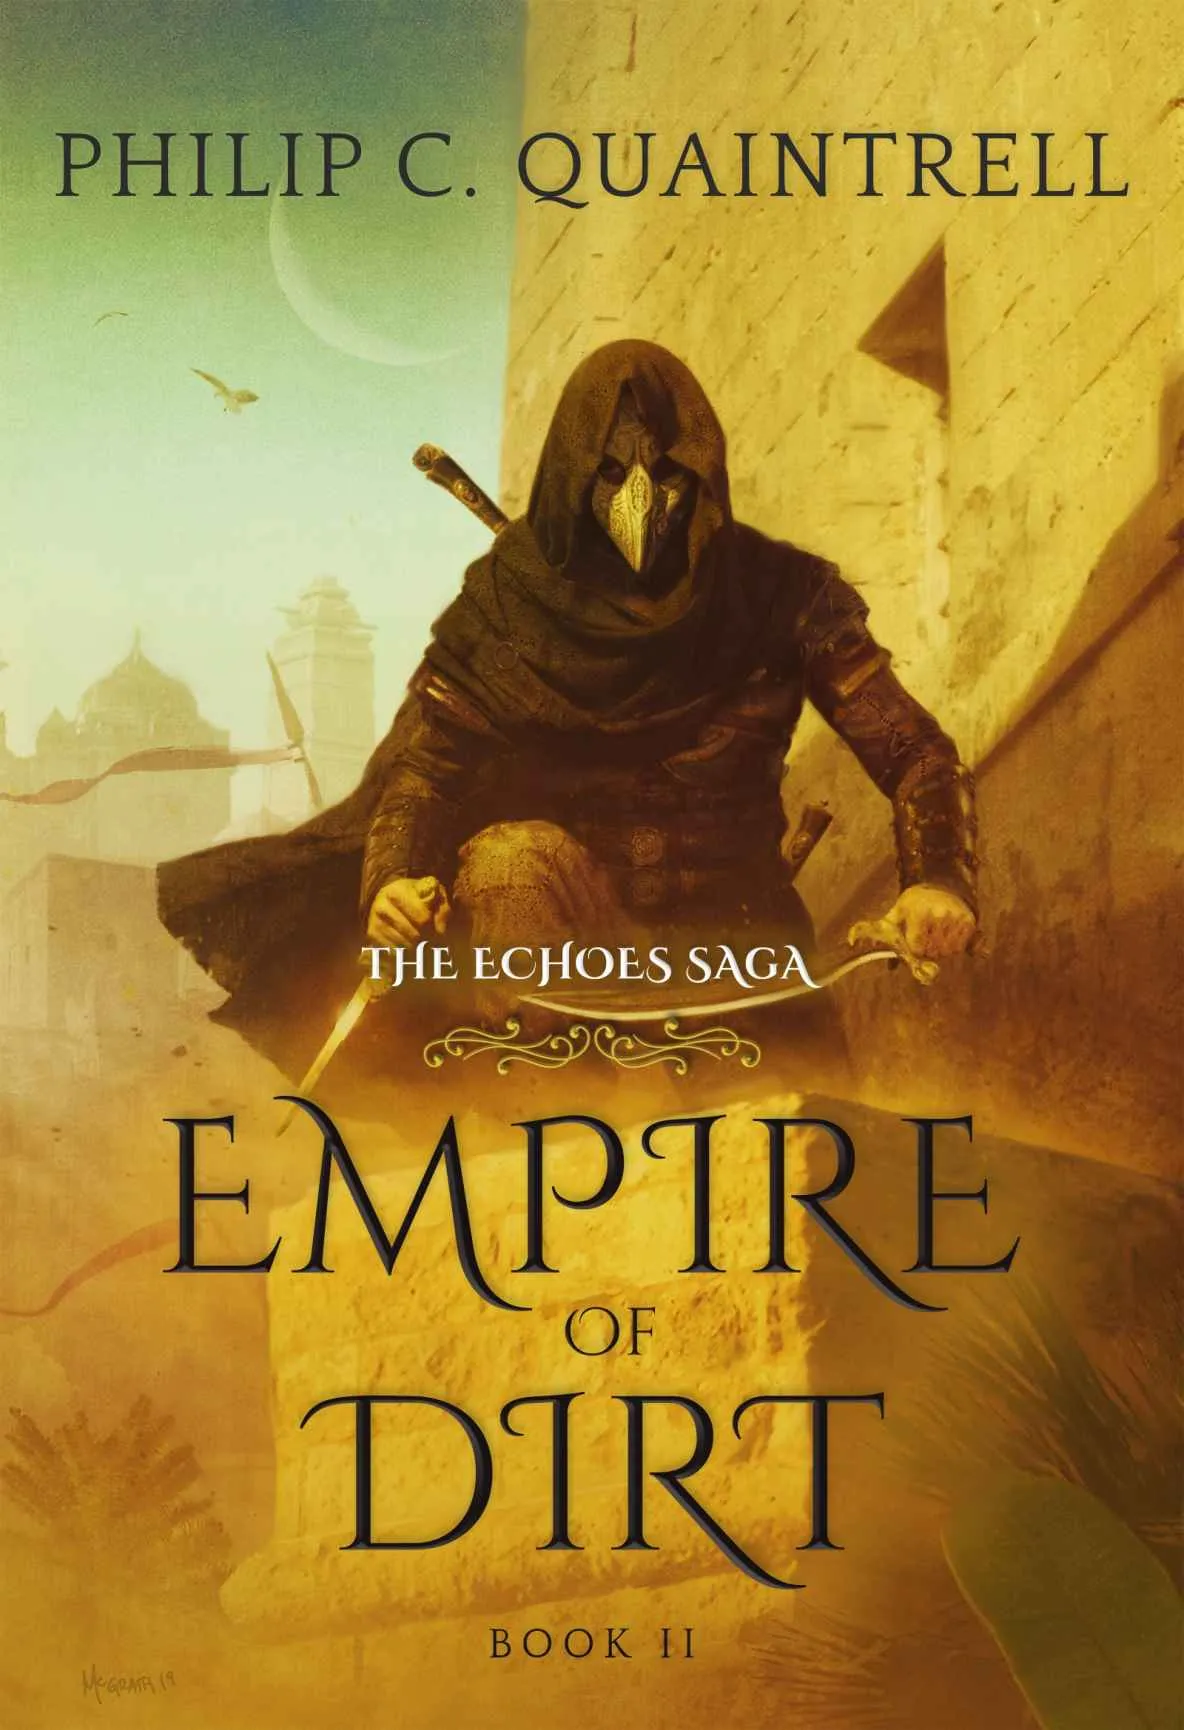 Empire of Dirt (The Echoes Saga #2)